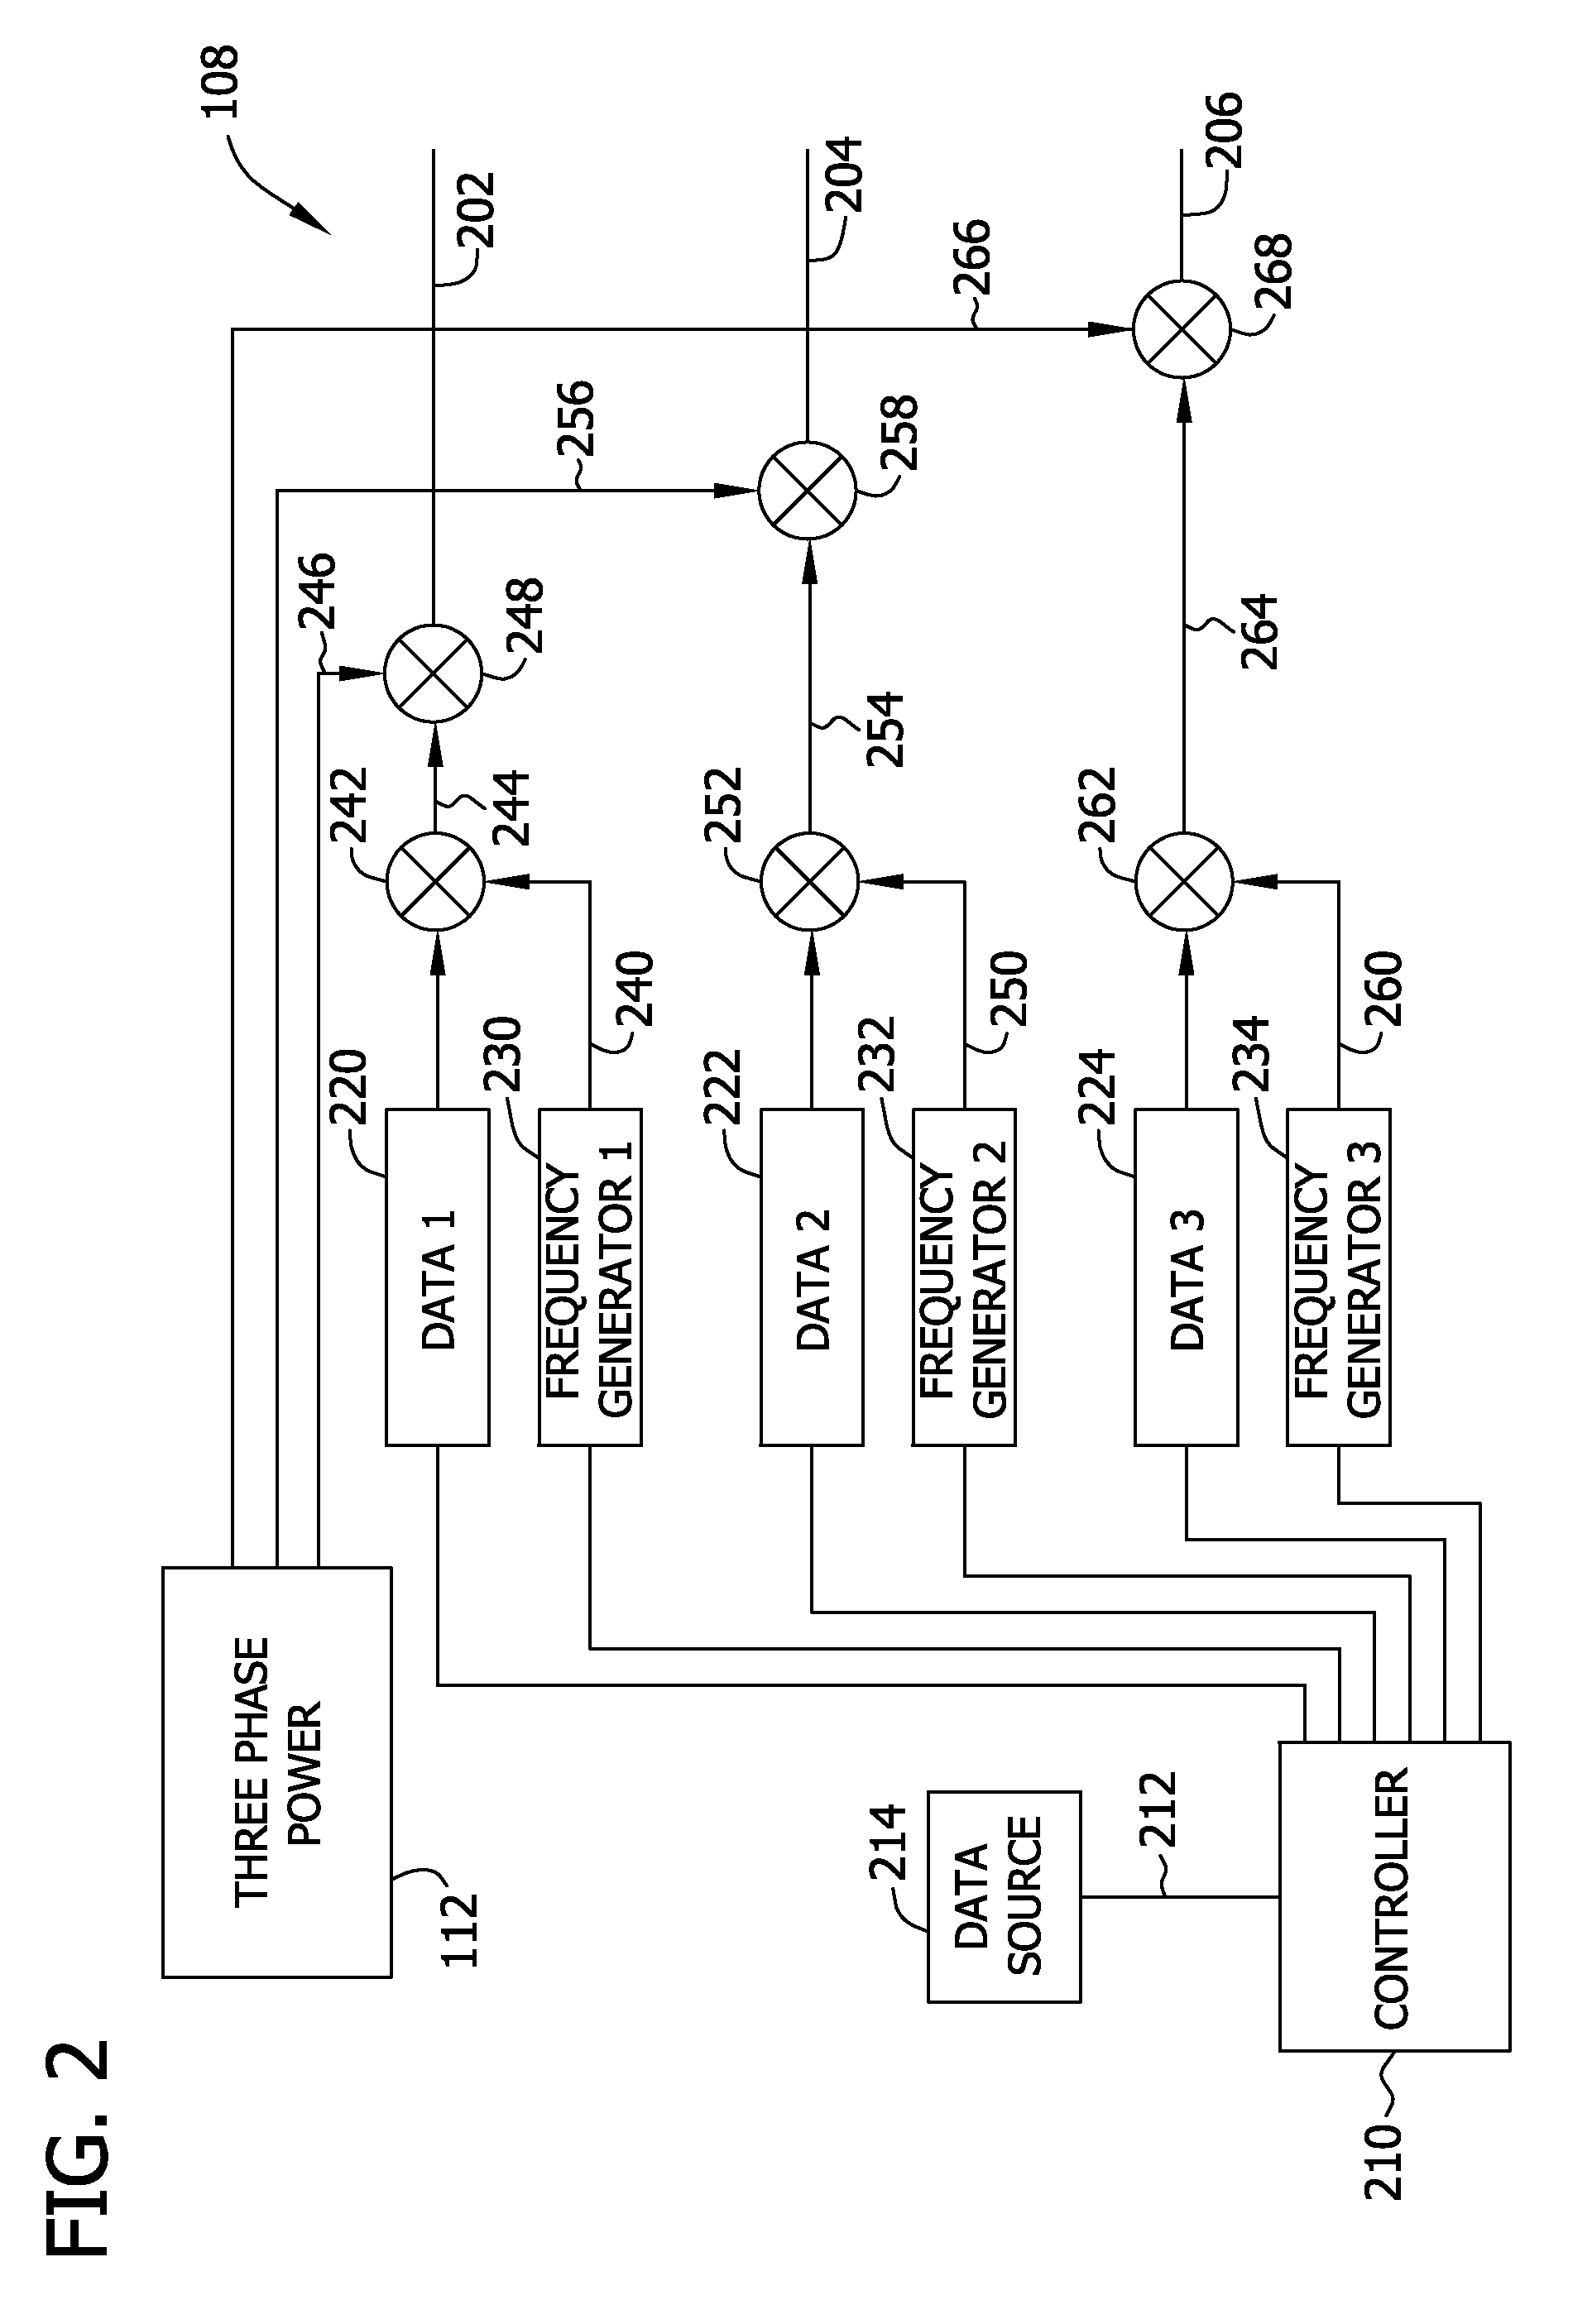 Methods and system for increasing data transmission rates across a three-phase power system